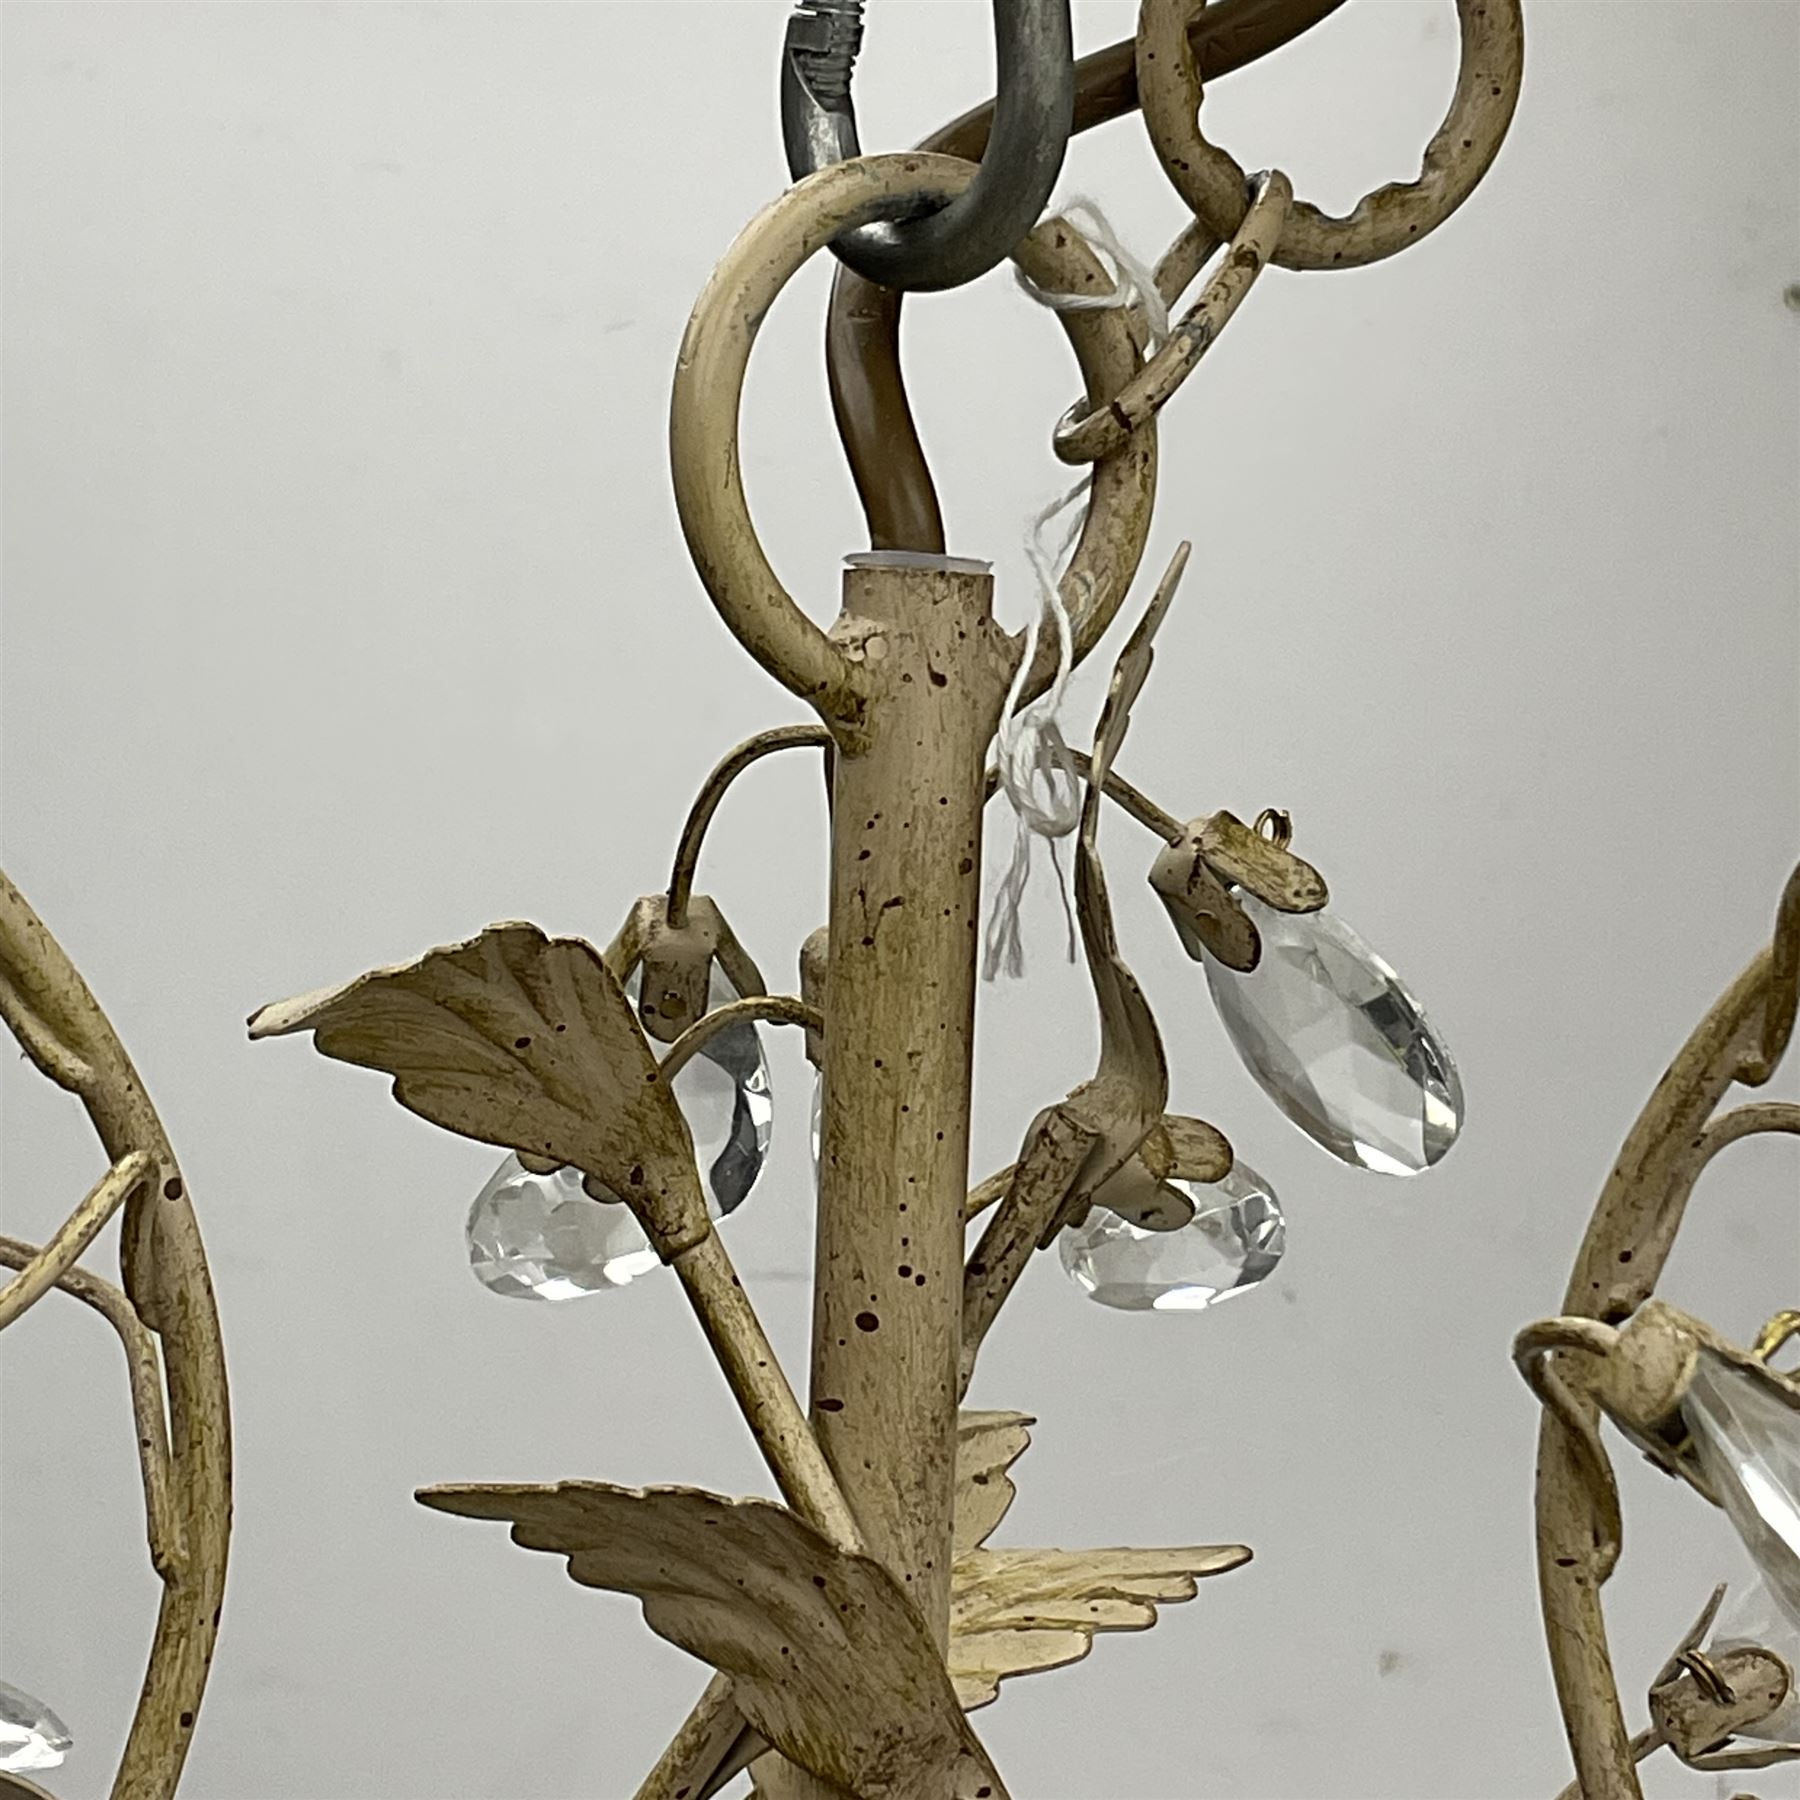 Laura Ashley - pair of eight branch metal chandeliers - Image 6 of 8